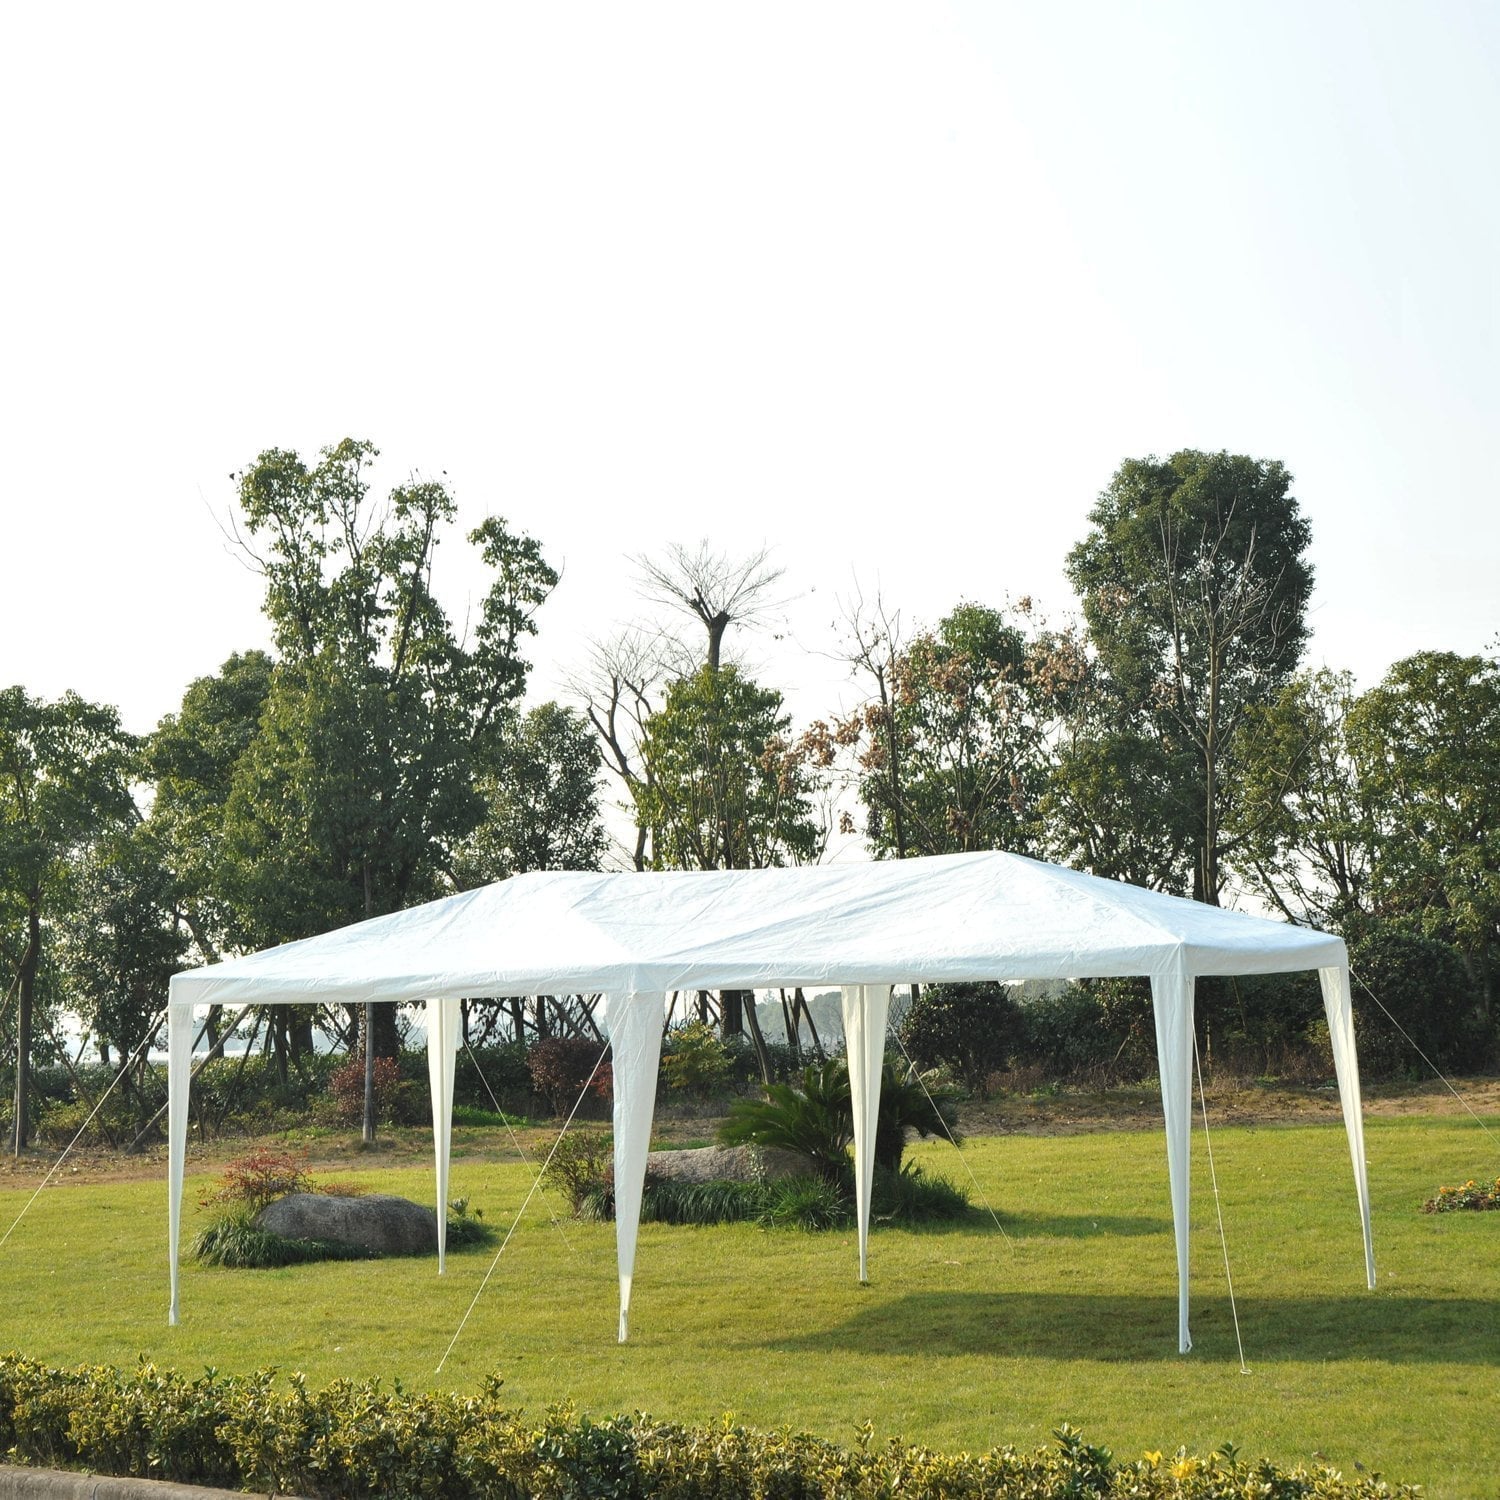 Outsunny 10' x 20' Canopy Tent Commercial Party Wedding Gazebo with Removable Netting Mesh Sidewalls, White